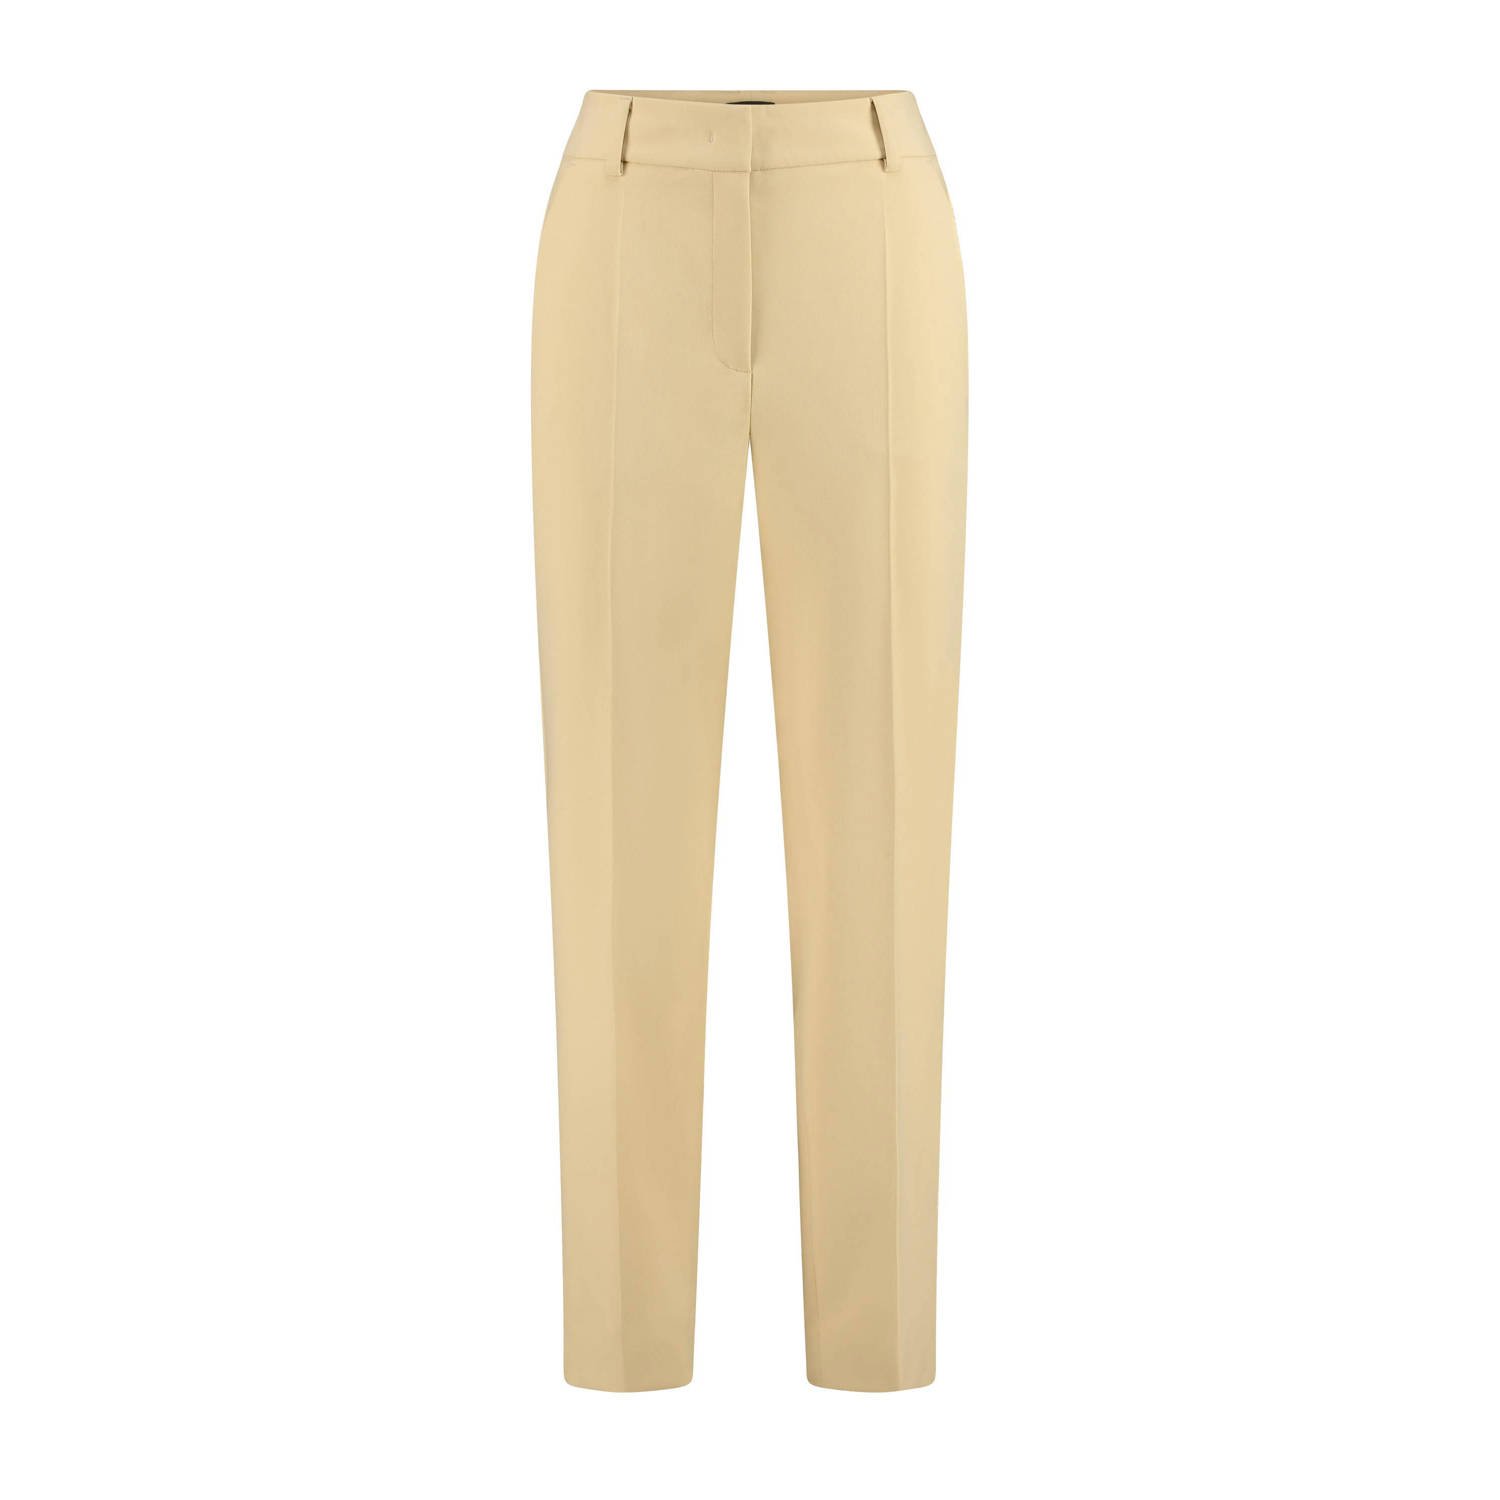 Claudia Sträter cropped tapered fit pantalon beige